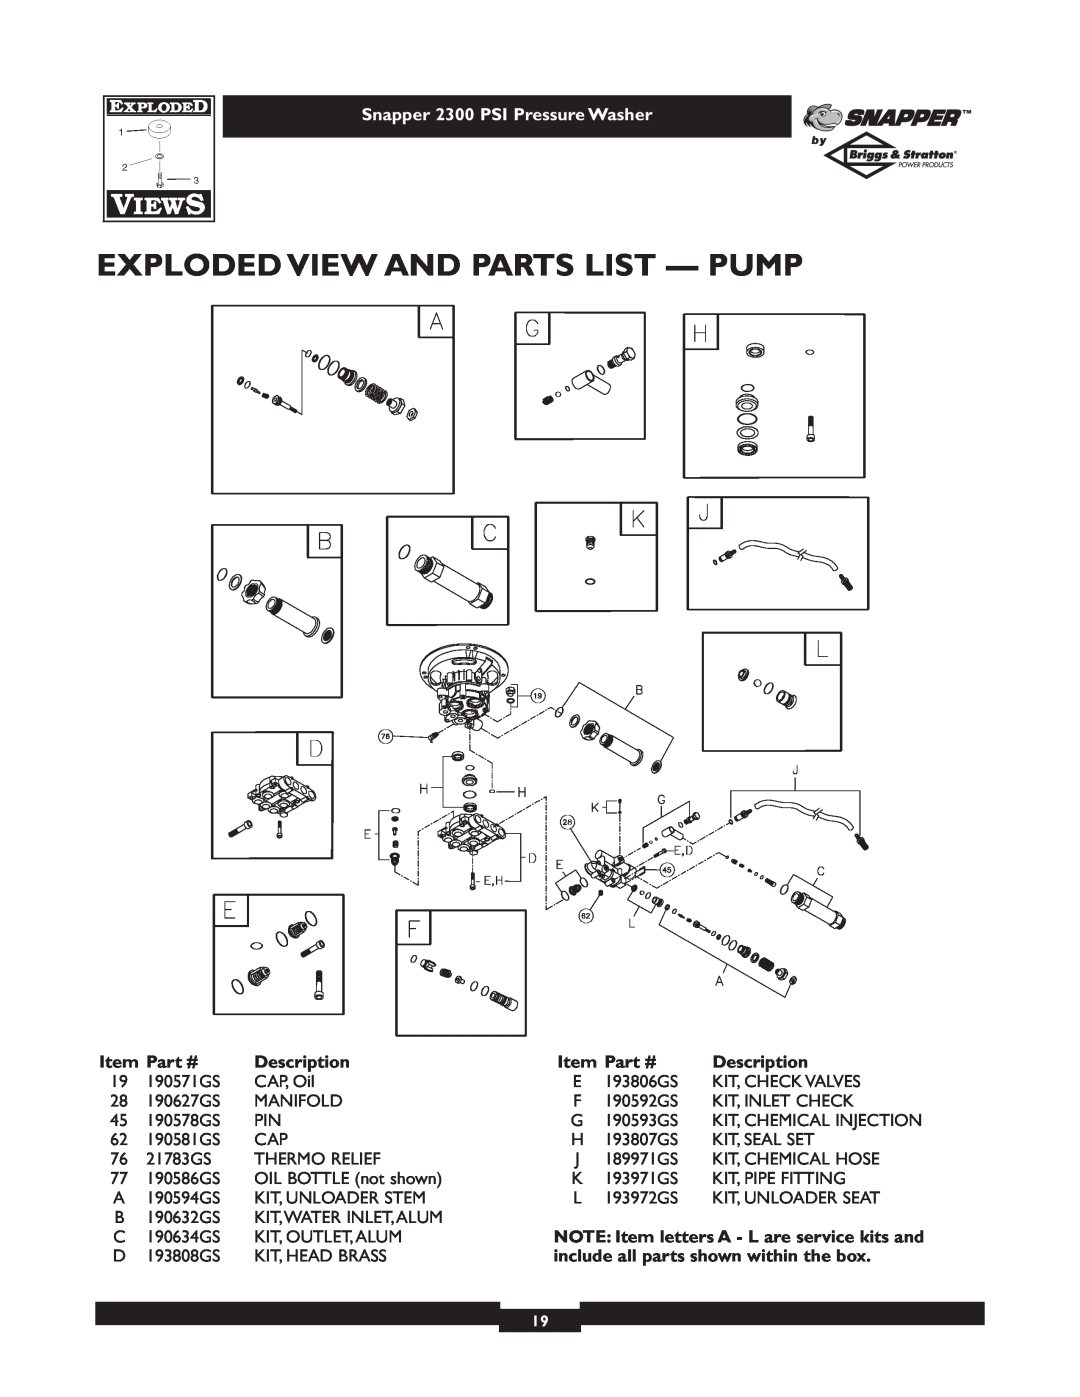 Snapper 1807-1 owner manual Exploded View And Parts List - Pump, NOTE Item letters A - L are service kits and, Description 